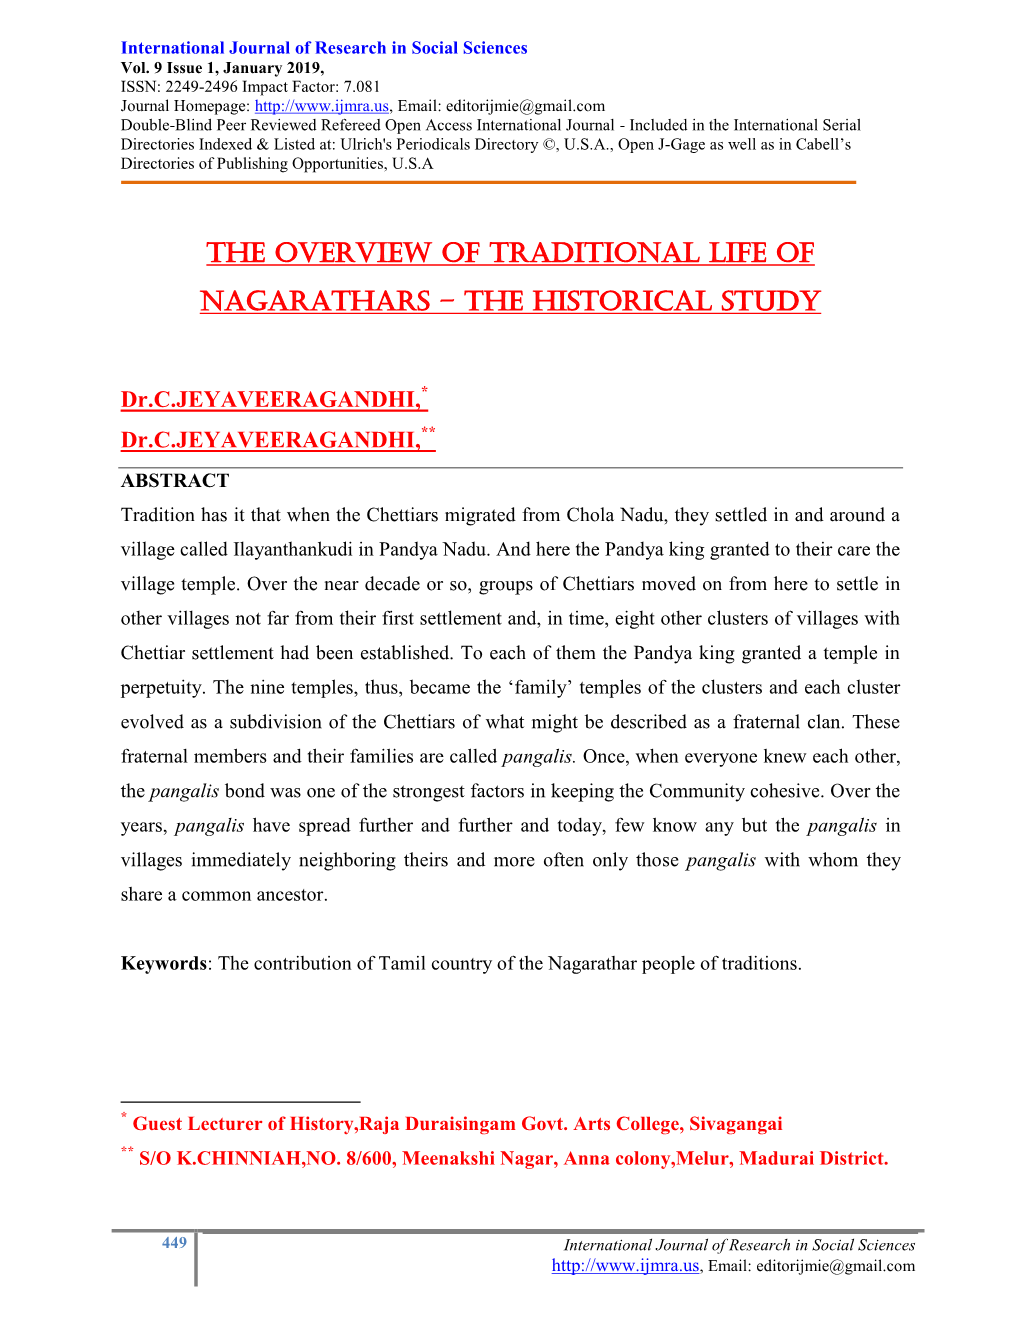 The Overview of Traditional Life of Nagarathars – the Historical Study